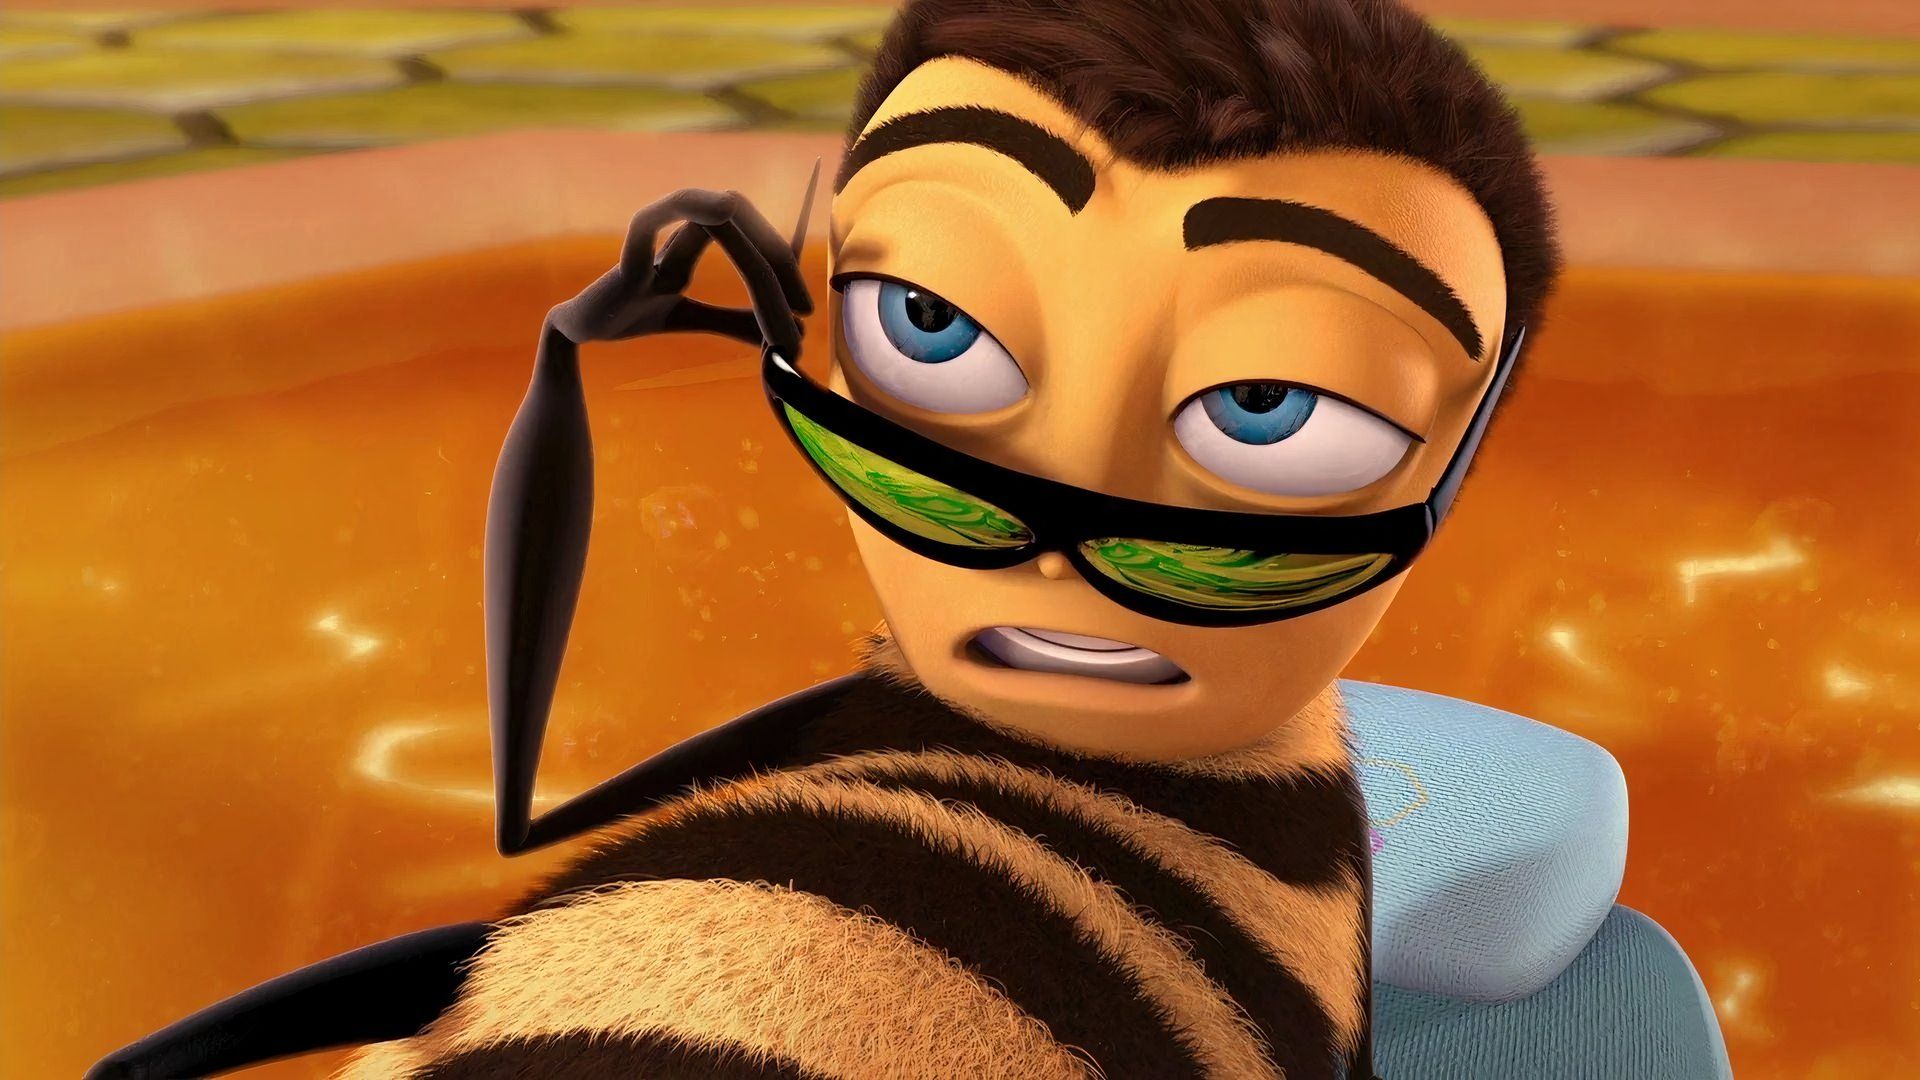 Jerry Seinfeld as Barry Benson in The Bee Movie